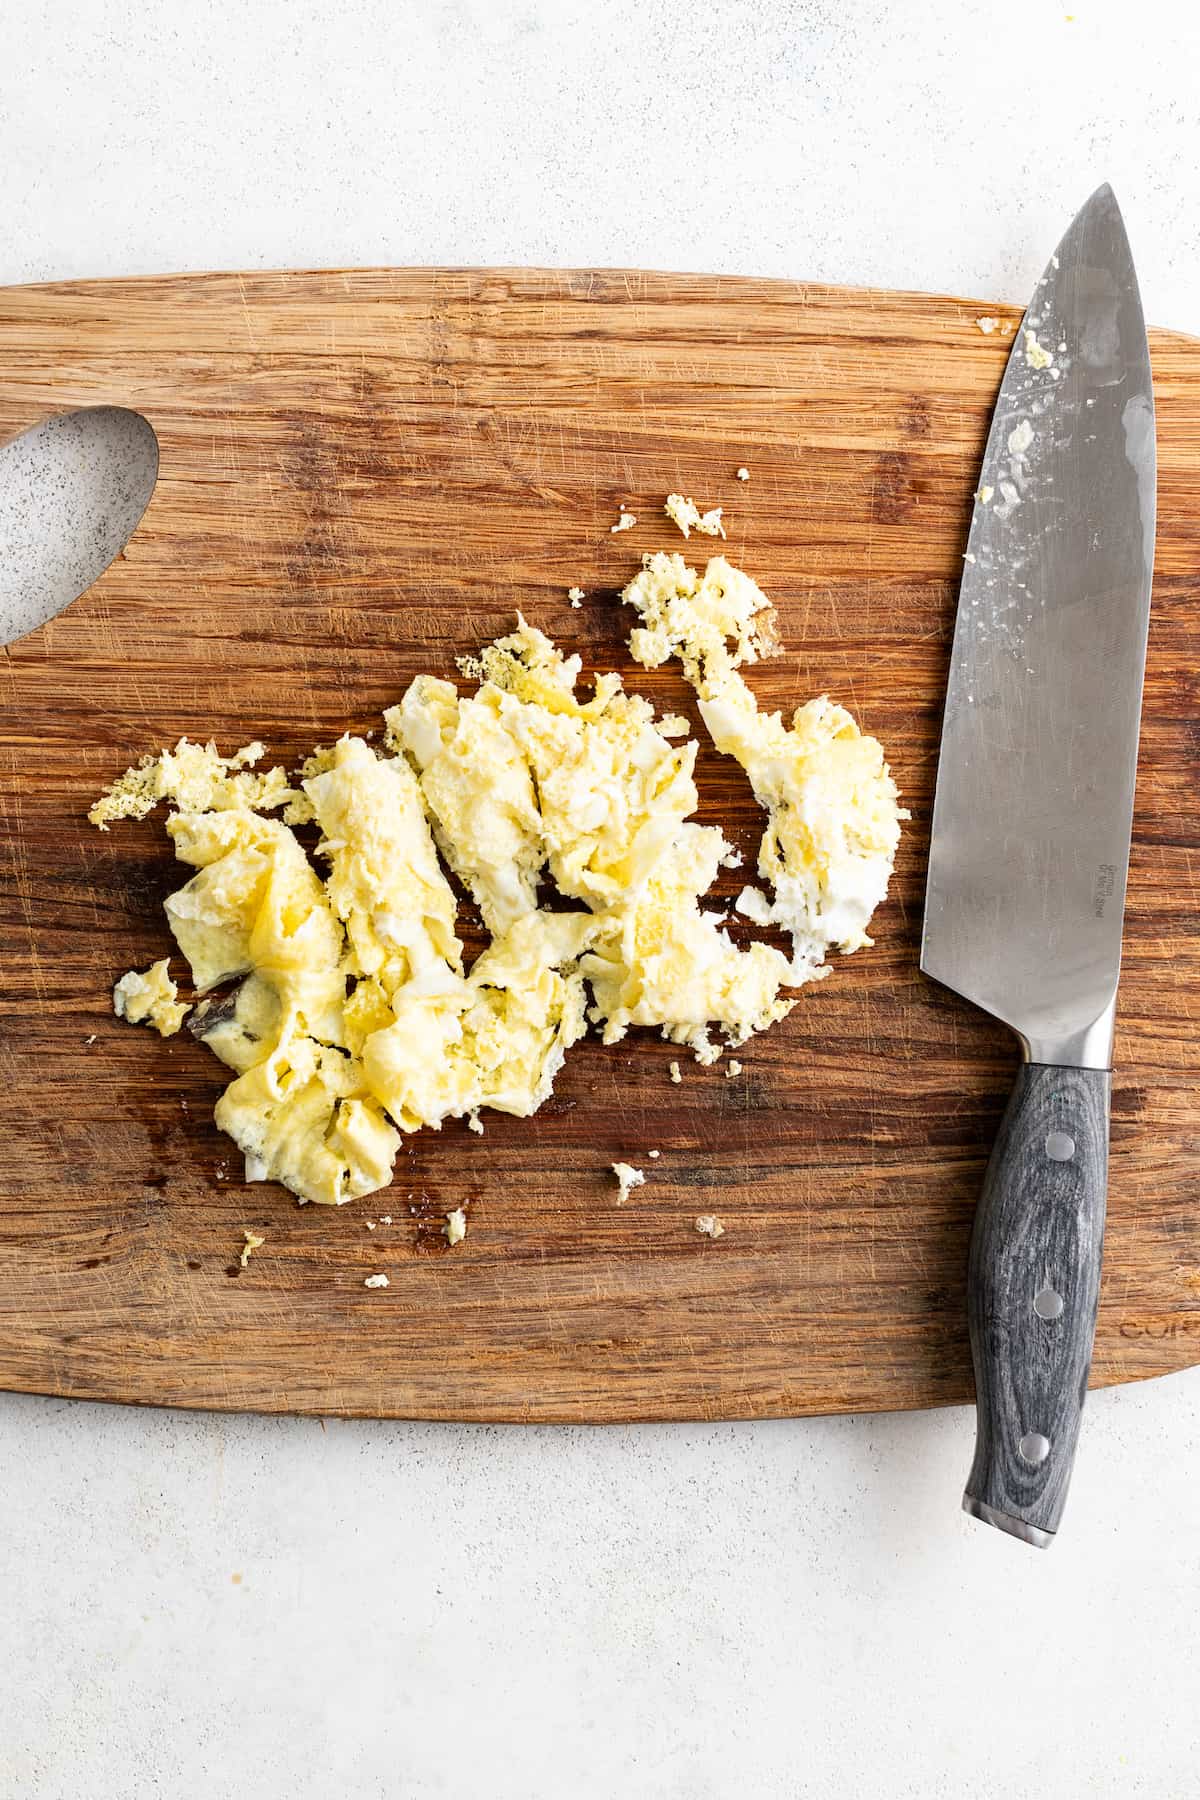 Chopping cooked scrambled eggs on a cutting board.